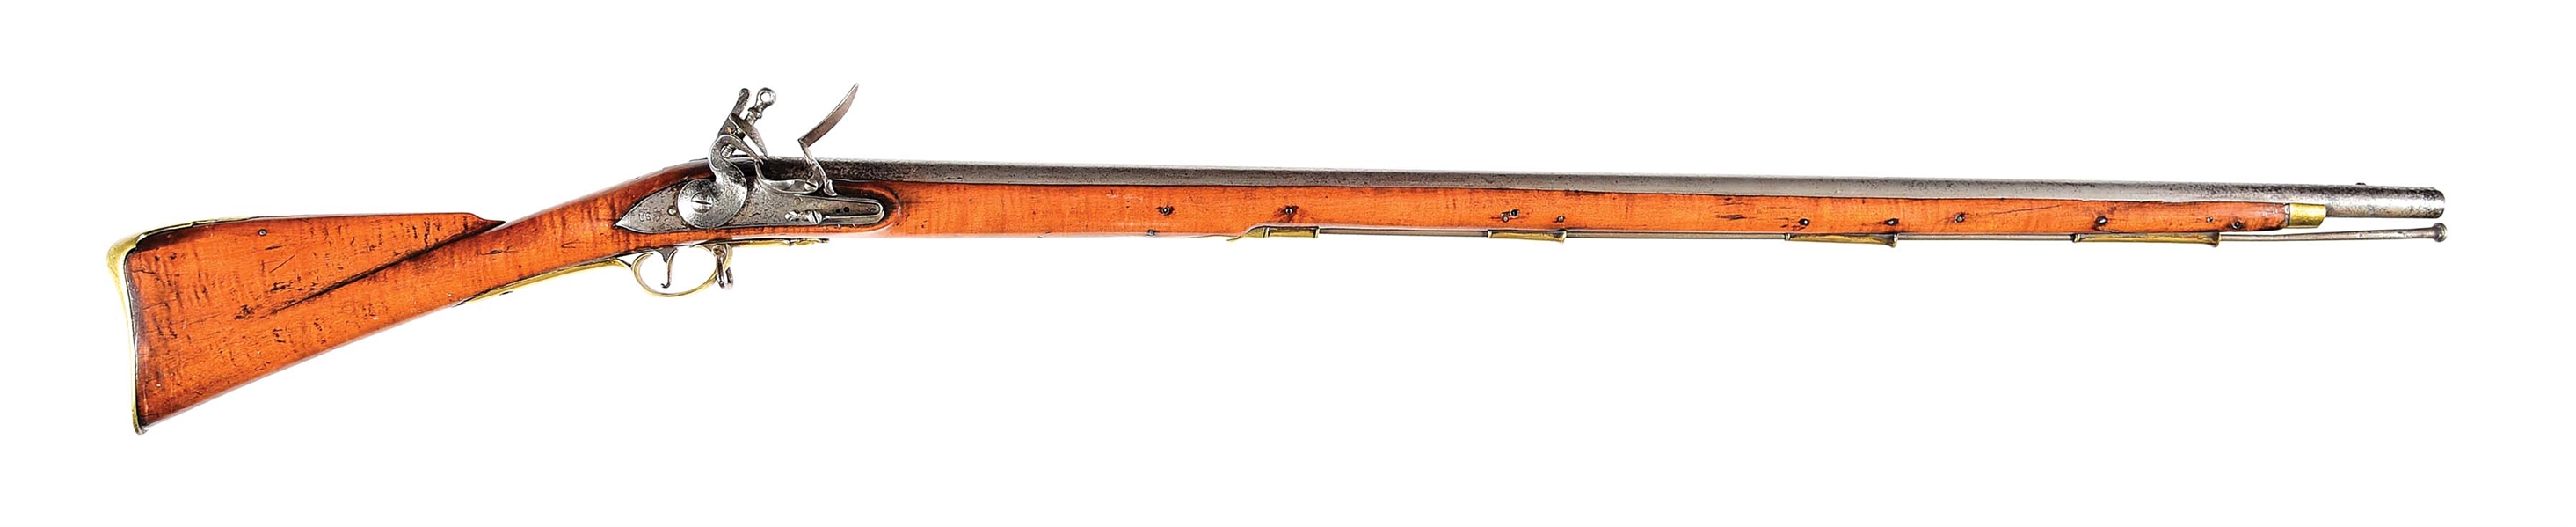 (A) IMPORTANT AMERICAN STOCKED MUSKET MARKED TO THE 53RD REGIMENT